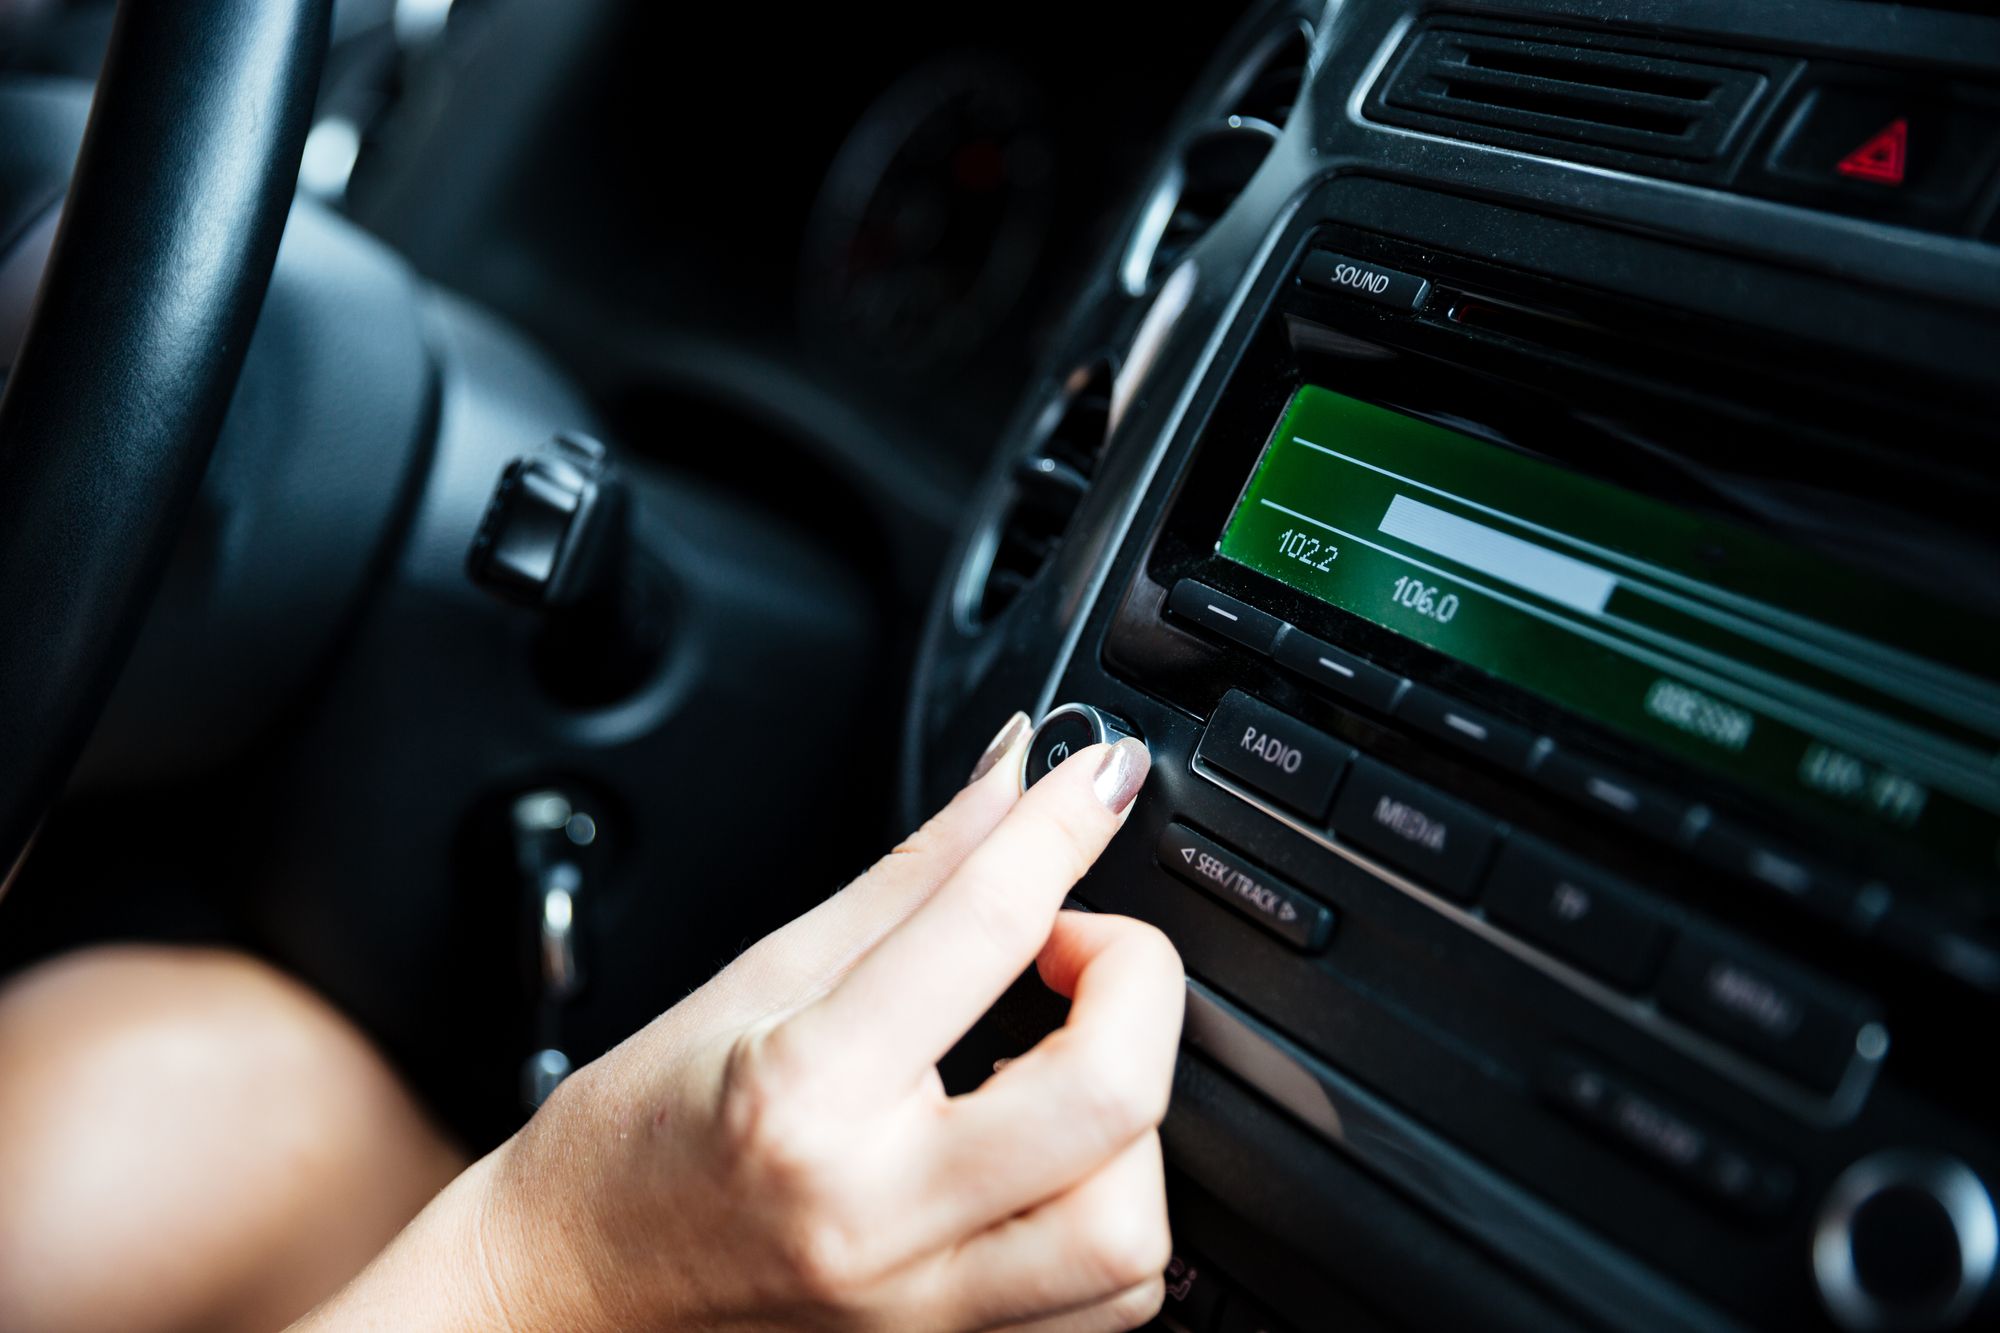 How to Listen to Online Radio in Your Car